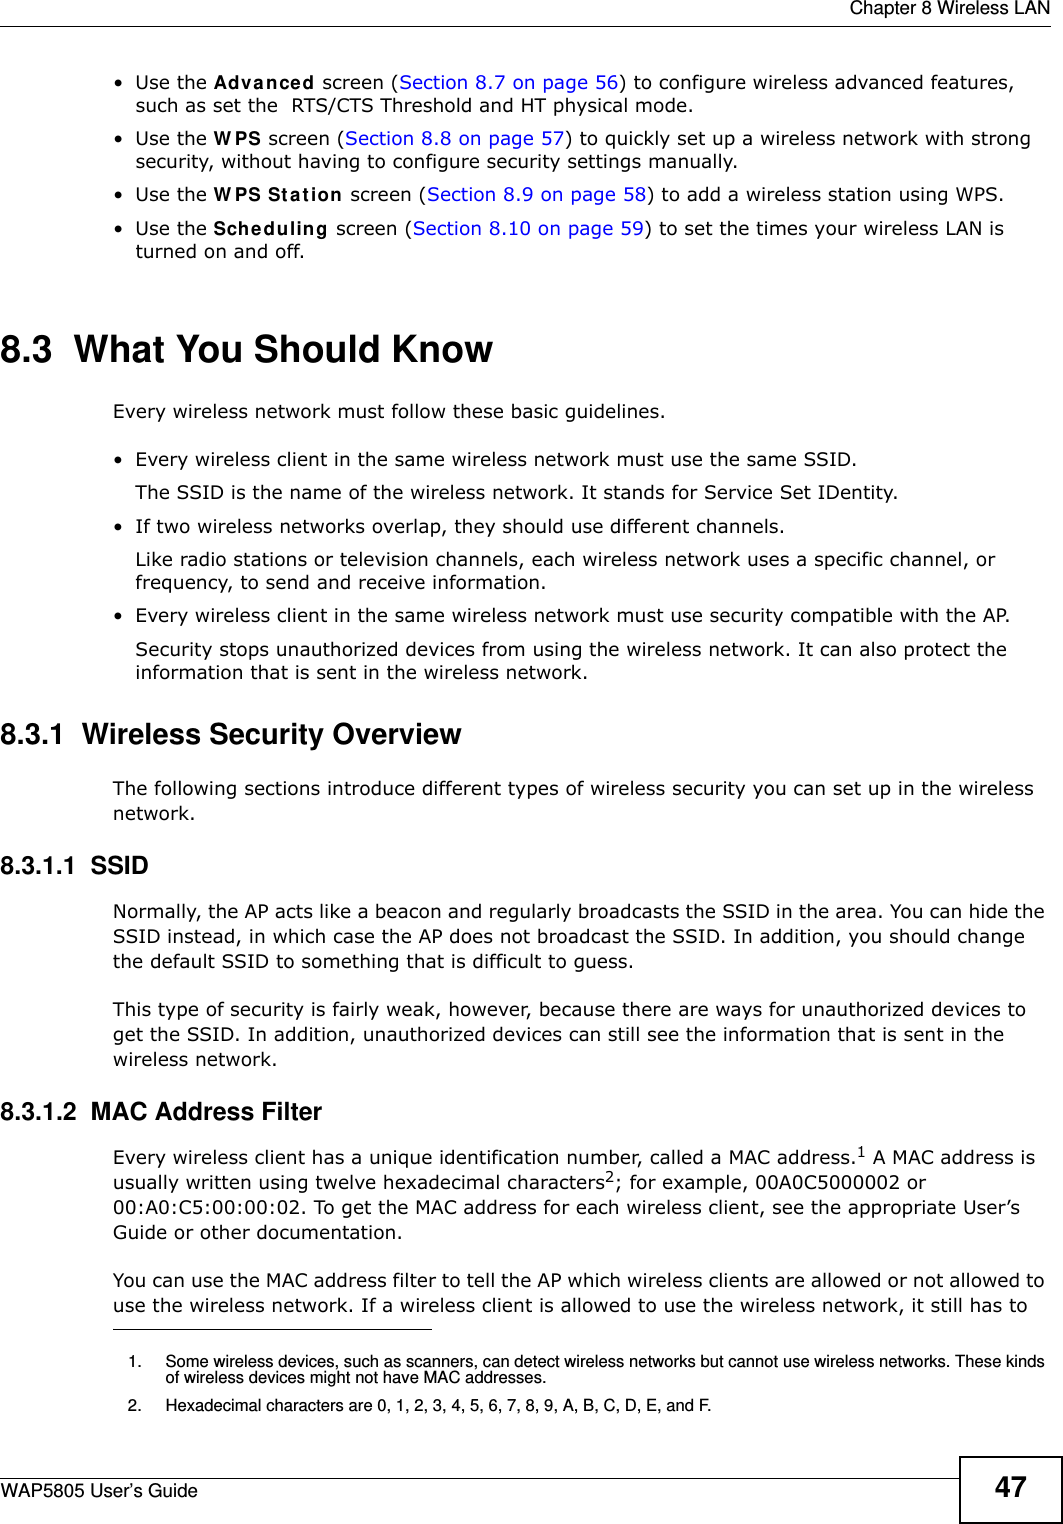  Chapter 8 Wireless LANWAP5805 User’s Guide 47•Use the Advanced screen (Section 8.7 on page 56) to configure wireless advanced features, such as set the  RTS/CTS Threshold and HT physical mode.•Use the WPS screen (Section 8.8 on page 57) to quickly set up a wireless network with strong security, without having to configure security settings manually.•Use the WPS Station screen (Section 8.9 on page 58) to add a wireless station using WPS. •Use the Scheduling screen (Section 8.10 on page 59) to set the times your wireless LAN is turned on and off.8.3  What You Should KnowEvery wireless network must follow these basic guidelines.• Every wireless client in the same wireless network must use the same SSID.The SSID is the name of the wireless network. It stands for Service Set IDentity.• If two wireless networks overlap, they should use different channels.Like radio stations or television channels, each wireless network uses a specific channel, or frequency, to send and receive information.• Every wireless client in the same wireless network must use security compatible with the AP.Security stops unauthorized devices from using the wireless network. It can also protect the information that is sent in the wireless network.8.3.1  Wireless Security OverviewThe following sections introduce different types of wireless security you can set up in the wireless network.8.3.1.1  SSIDNormally, the AP acts like a beacon and regularly broadcasts the SSID in the area. You can hide the SSID instead, in which case the AP does not broadcast the SSID. In addition, you should change the default SSID to something that is difficult to guess.This type of security is fairly weak, however, because there are ways for unauthorized devices to get the SSID. In addition, unauthorized devices can still see the information that is sent in the wireless network.8.3.1.2  MAC Address FilterEvery wireless client has a unique identification number, called a MAC address.1 A MAC address is usually written using twelve hexadecimal characters2; for example, 00A0C5000002 or 00:A0:C5:00:00:02. To get the MAC address for each wireless client, see the appropriate User’s Guide or other documentation.You can use the MAC address filter to tell the AP which wireless clients are allowed or not allowed to use the wireless network. If a wireless client is allowed to use the wireless network, it still has to 1. Some wireless devices, such as scanners, can detect wireless networks but cannot use wireless networks. These kinds of wireless devices might not have MAC addresses.2. Hexadecimal characters are 0, 1, 2, 3, 4, 5, 6, 7, 8, 9, A, B, C, D, E, and F.